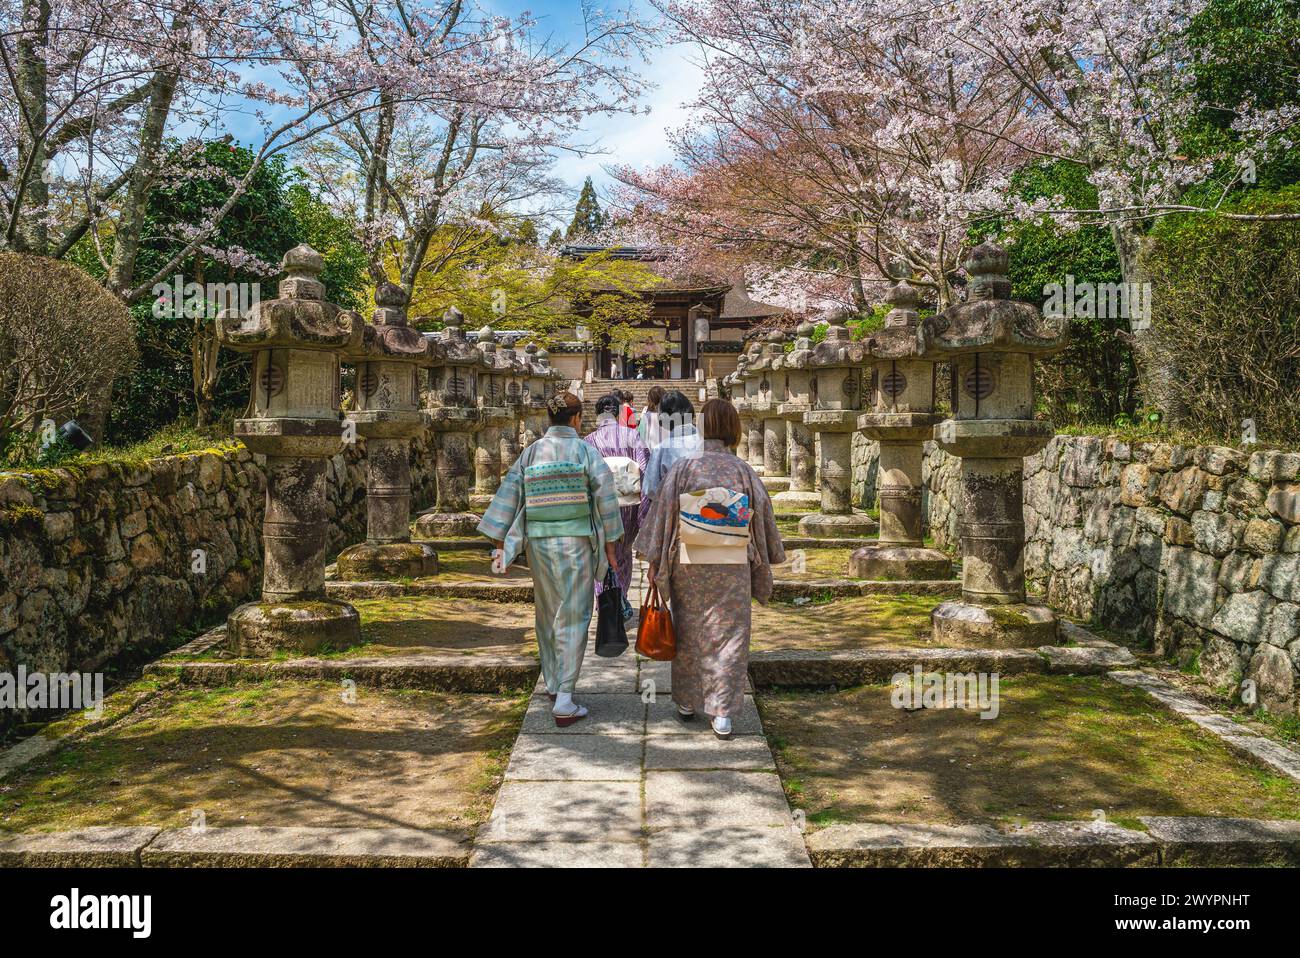 Onjoji temple, or Miidera, with cherry blossom at Mount Hiei in Otsu city in Shiga, Japan Stock Photo